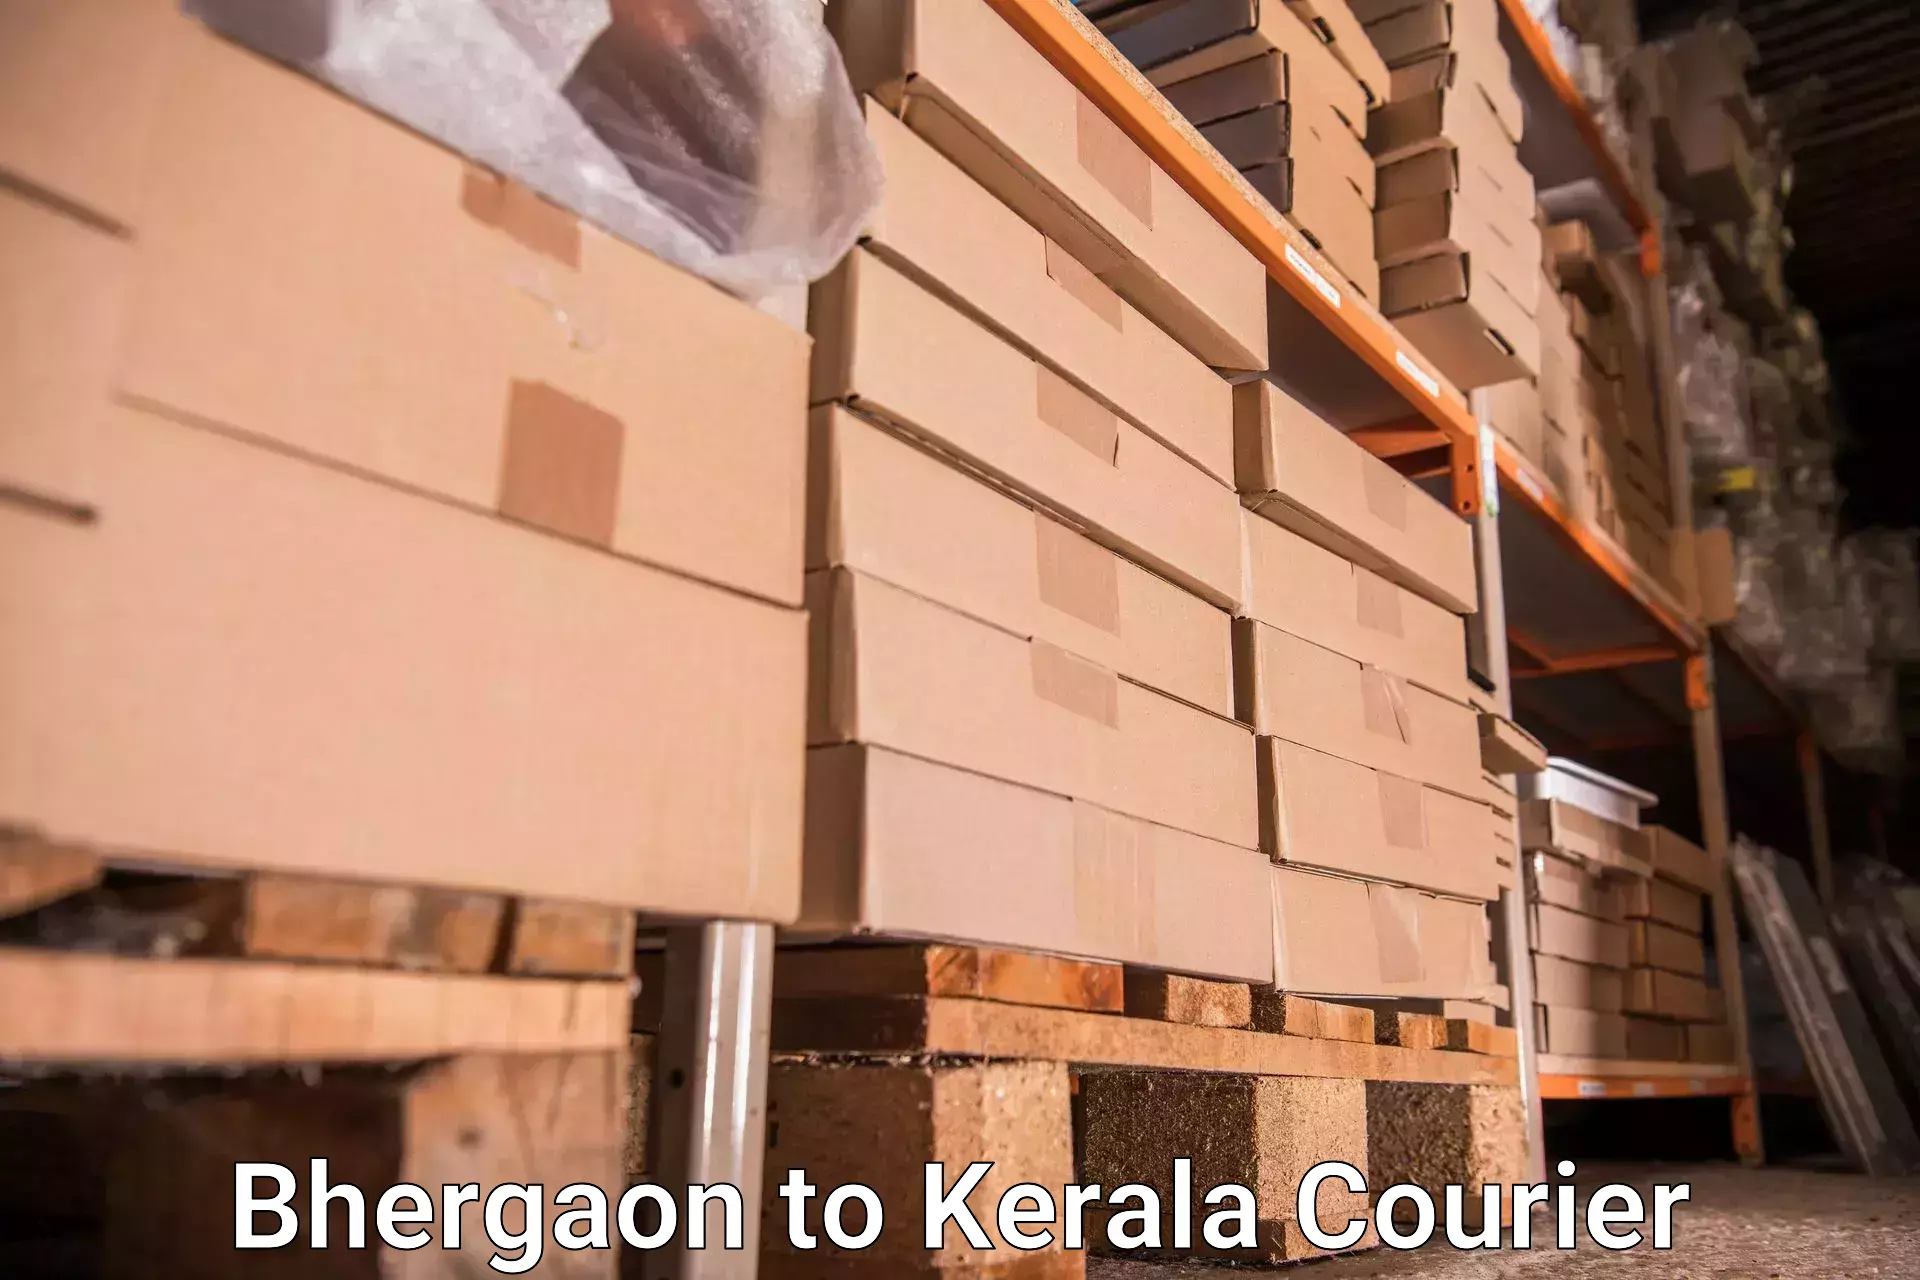 Baggage relocation service Bhergaon to Kozhikode